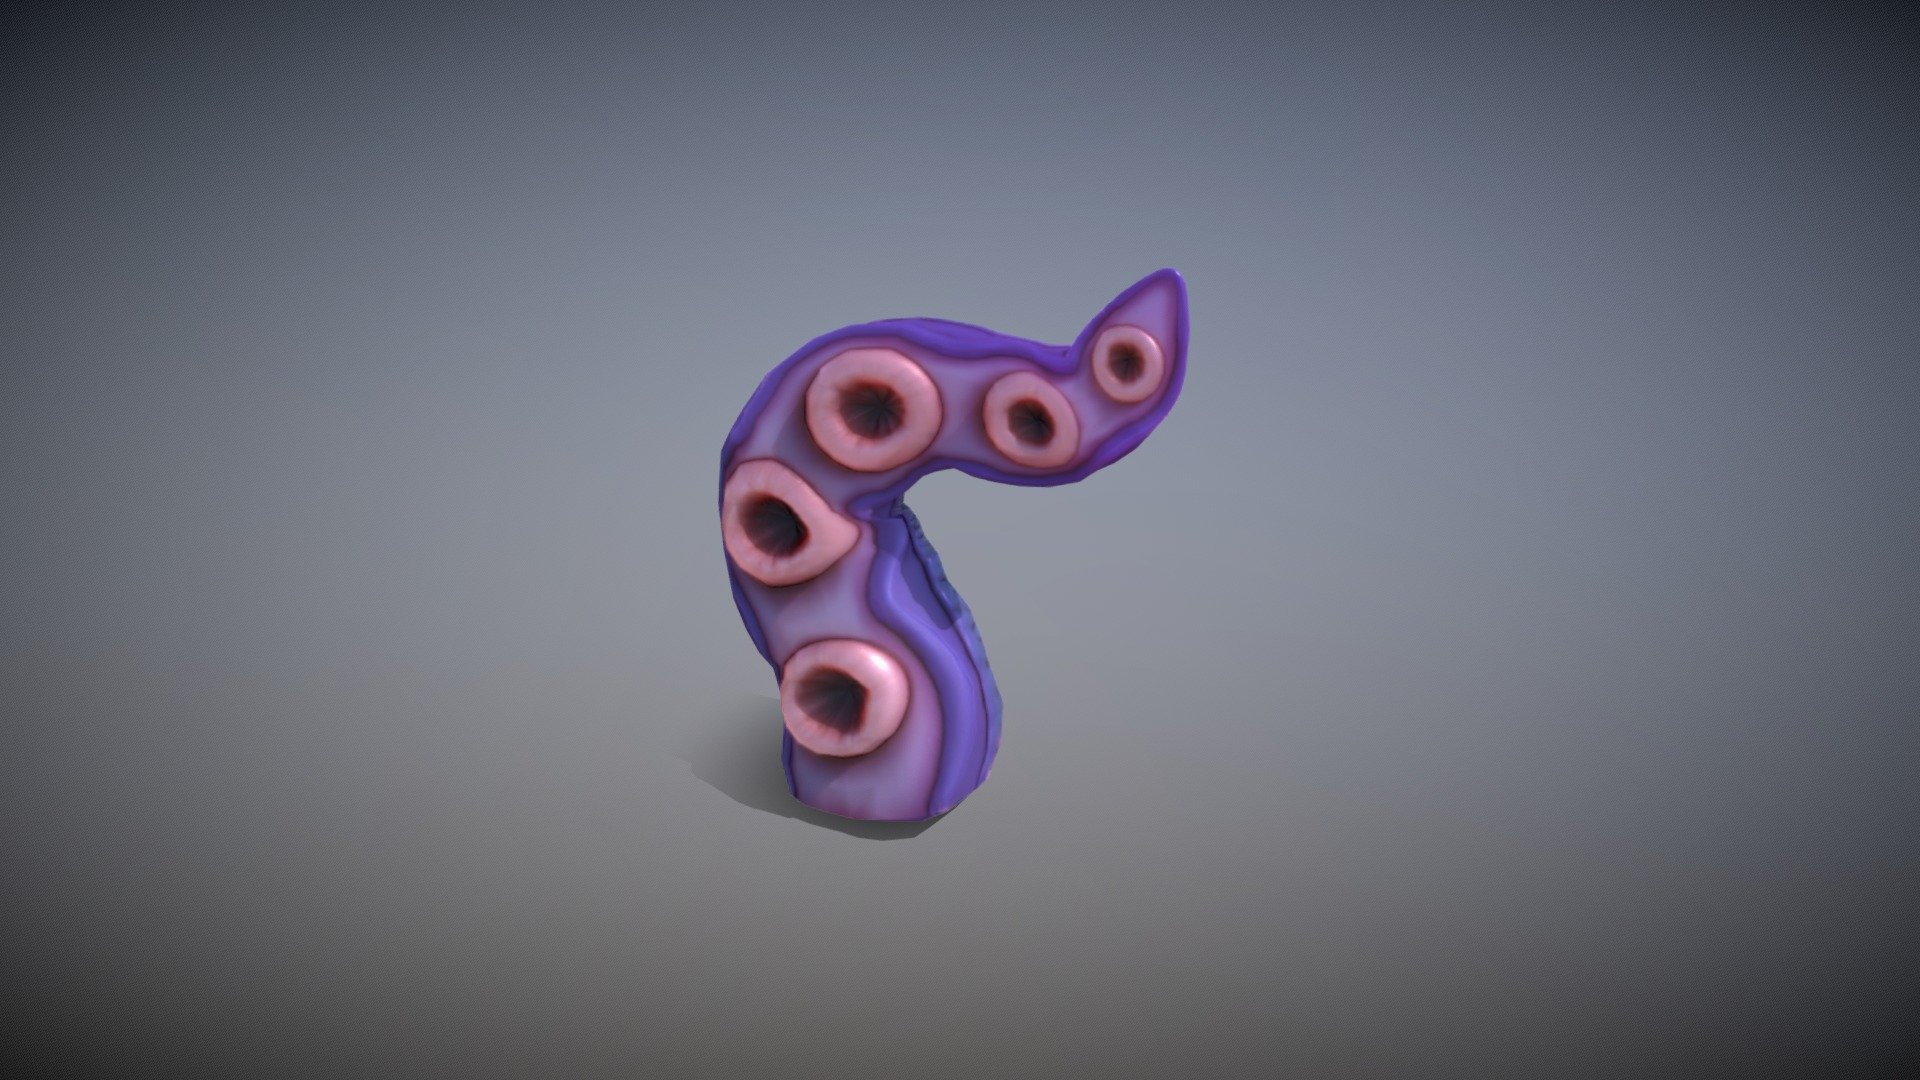 Here's a tentacle monster. It comes with a set of animations:
* Emerge from water
* Transition from Emerge to idle
* Idle animation - waving around
* Alert animation - detected something nearby
* Two attack animations - you can use one as light attack and the other as strong attack.
* Retreat animation - this is not the emerge animation in reverse 3d model